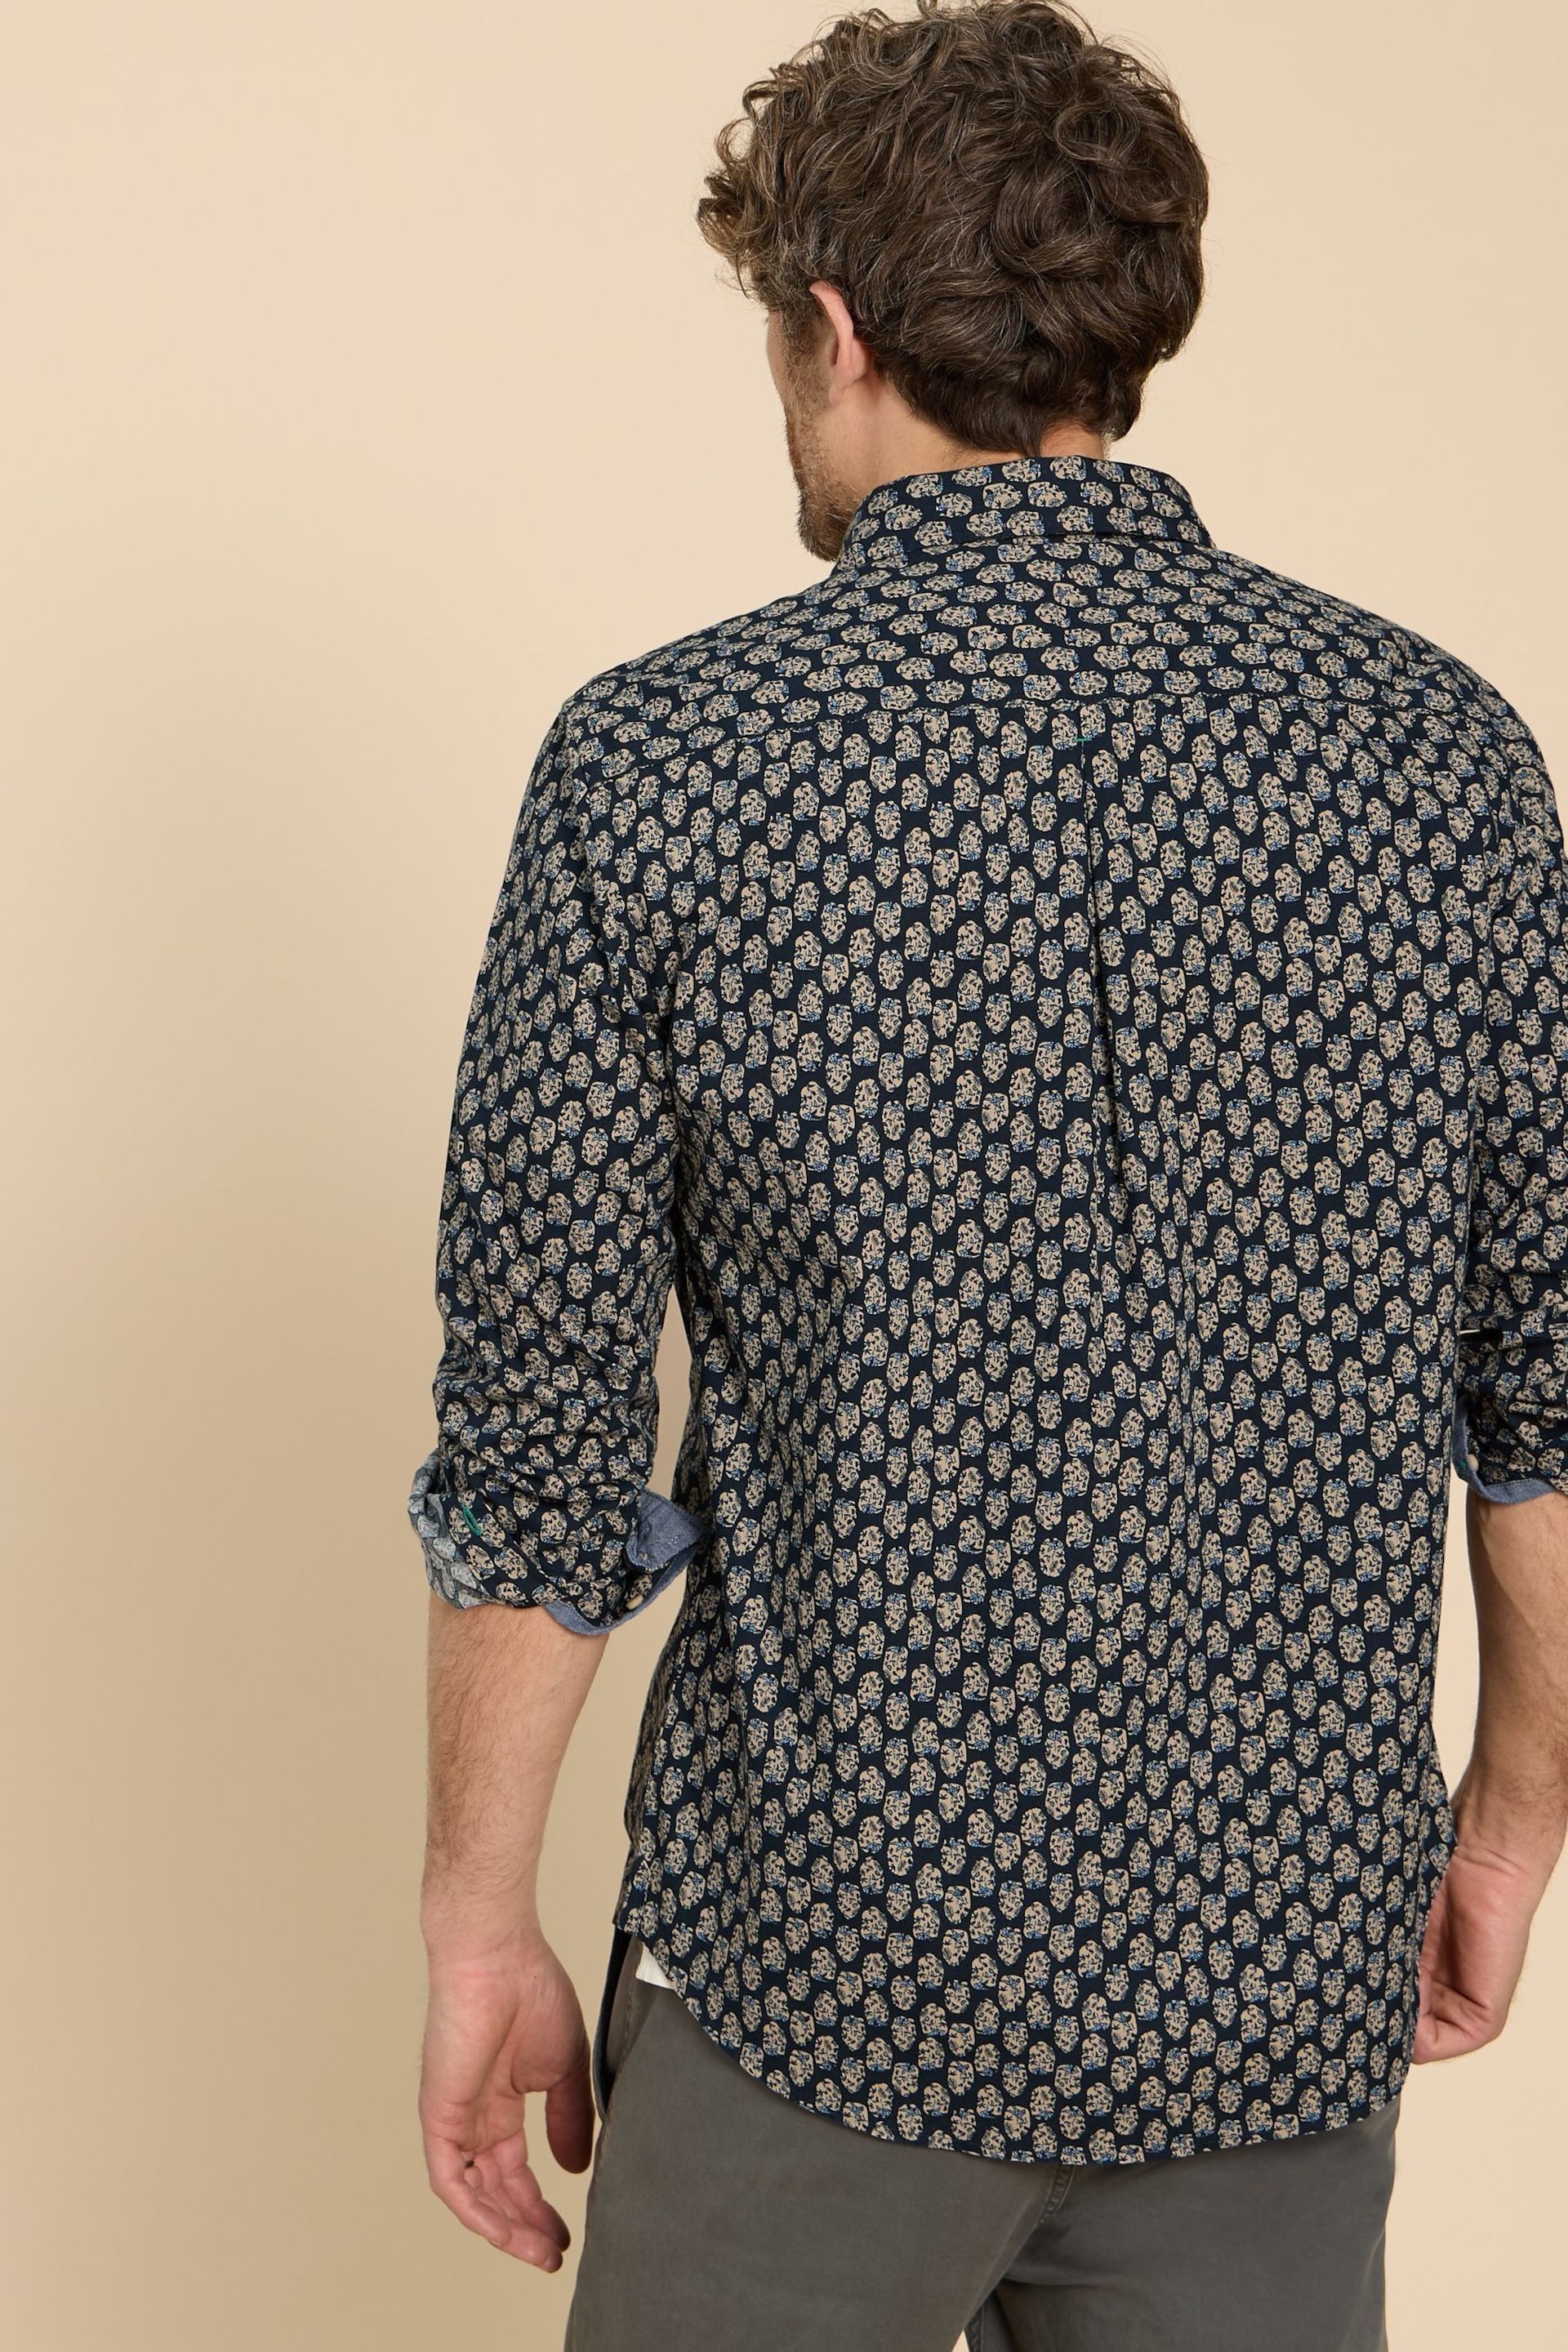 White Stuff Blue Geo Floral Printed Shirt - Image 2 of 7